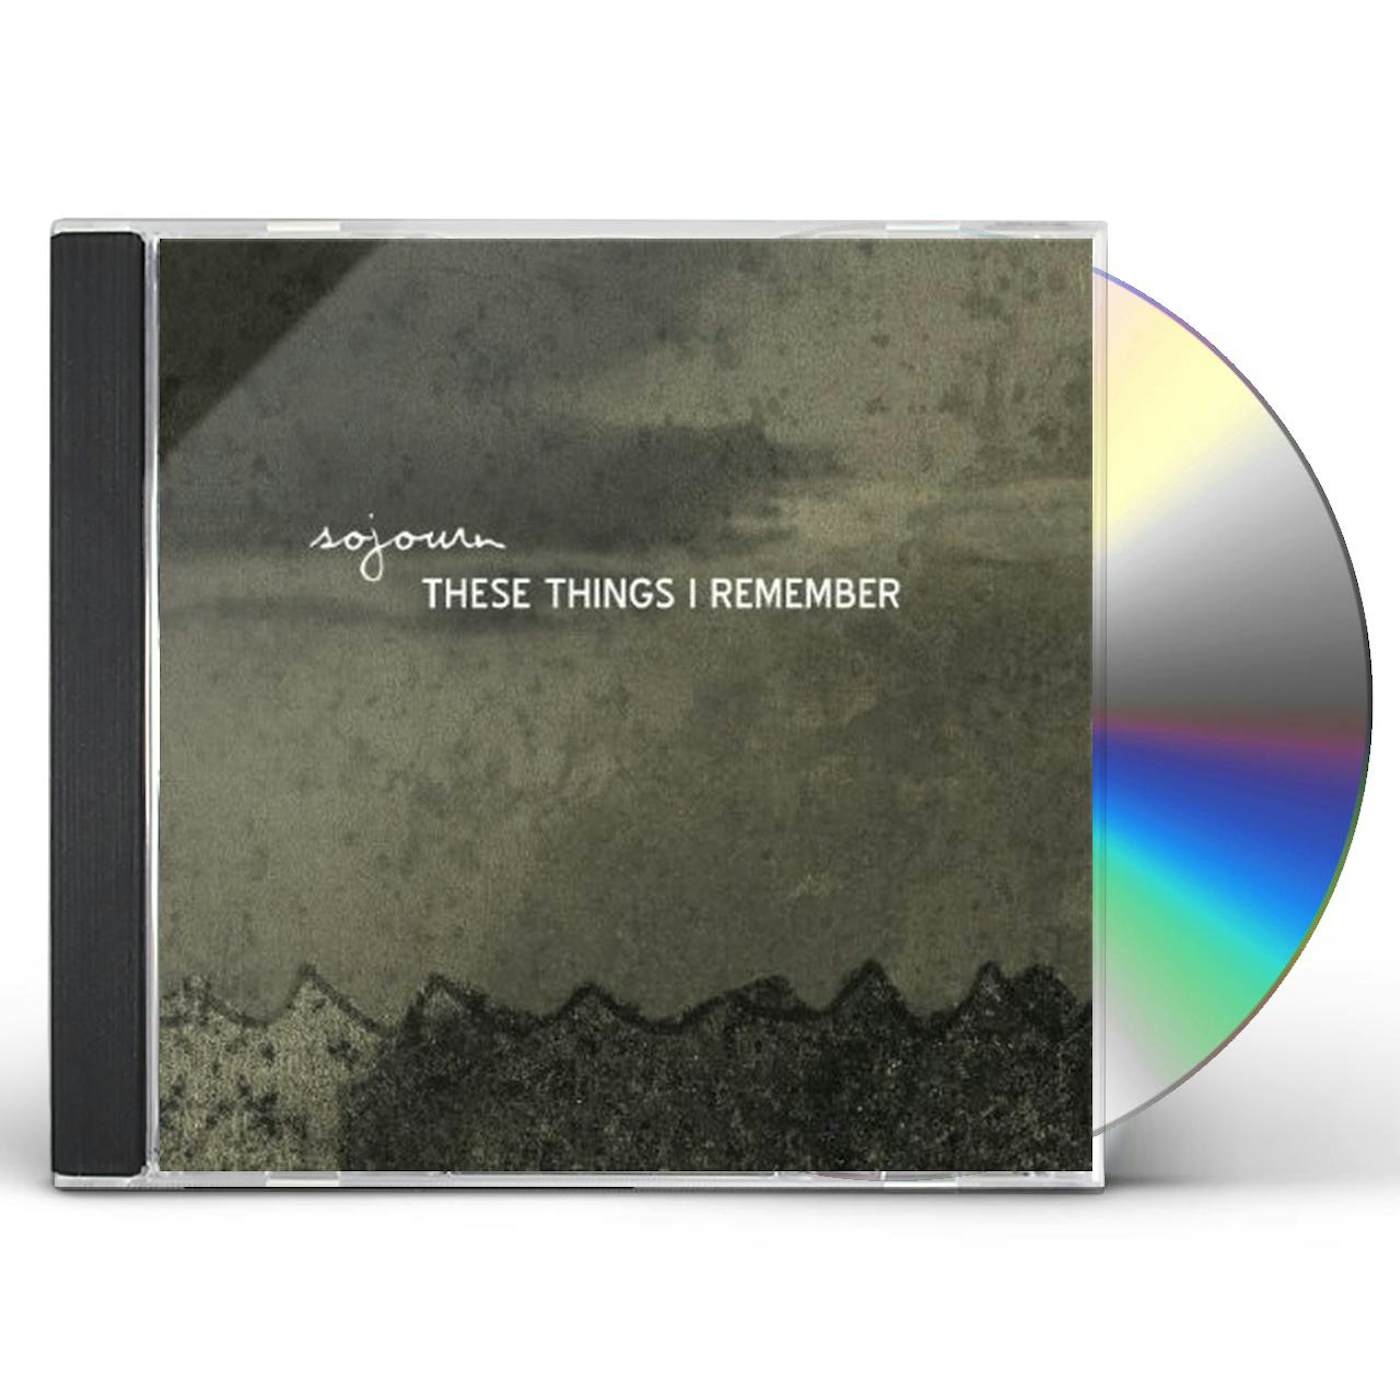 Sojourn THESE THINGS I REMEMBER CD